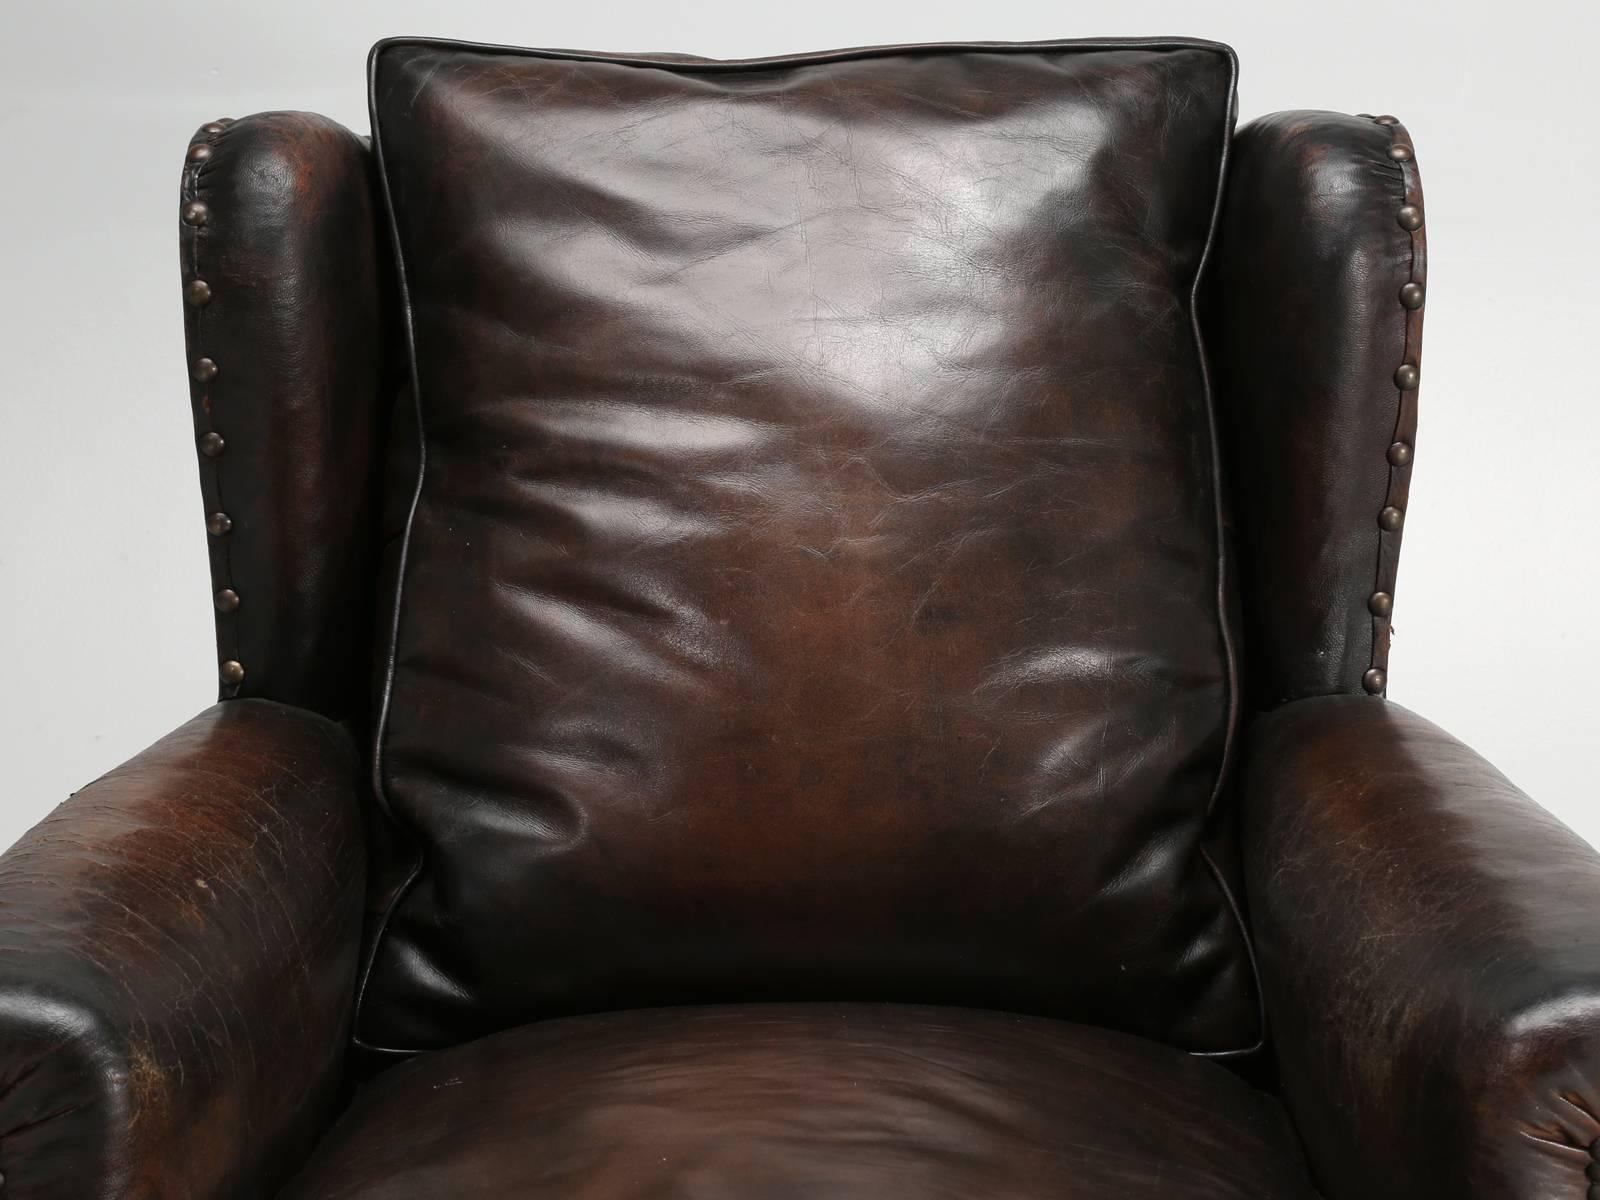 This is one of my favorite style French leather club chairs and in fact, I have a nearly identical one in my office. For any man or woman, who is 6’ of taller, this is the ideal French leather club chair, for it is exceptionally deep and supremely